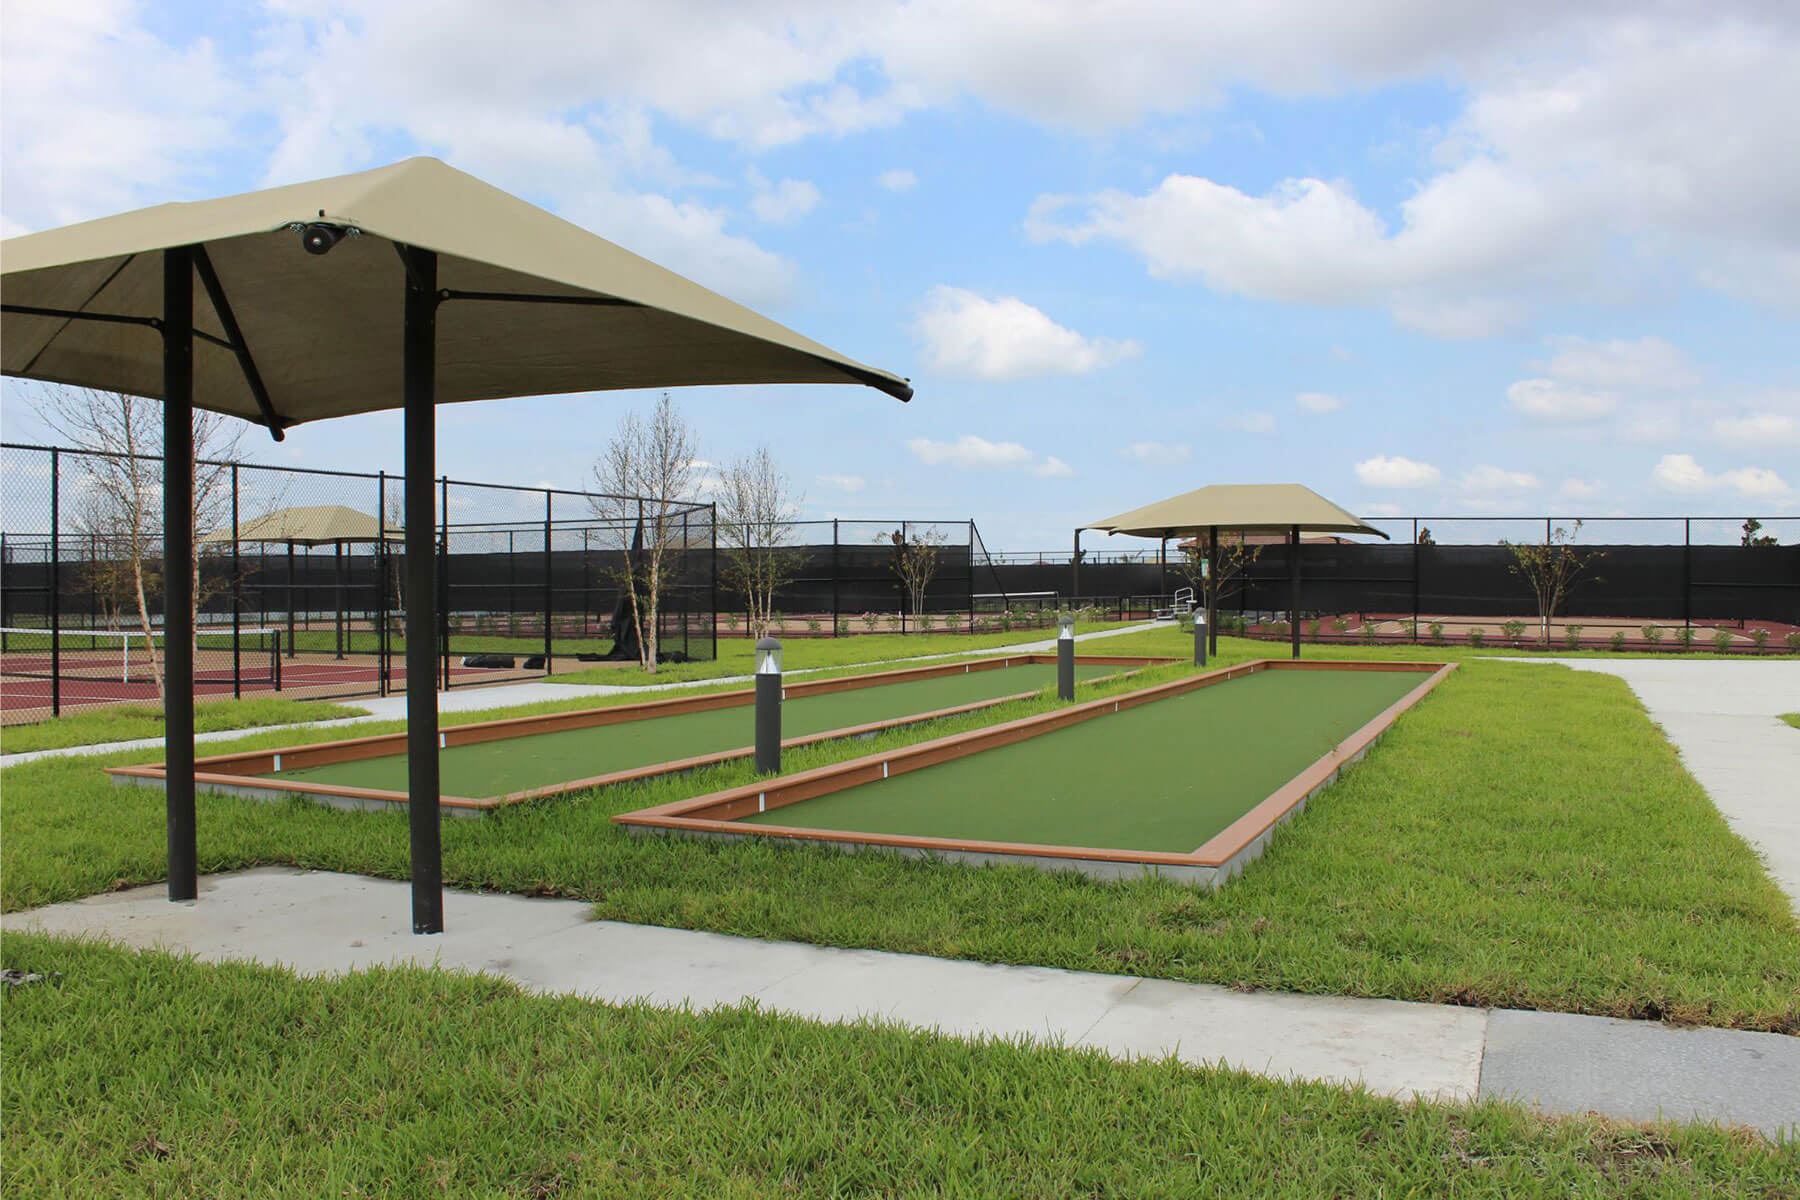 Outdoor pickle ball, tennis and bocce ball courts